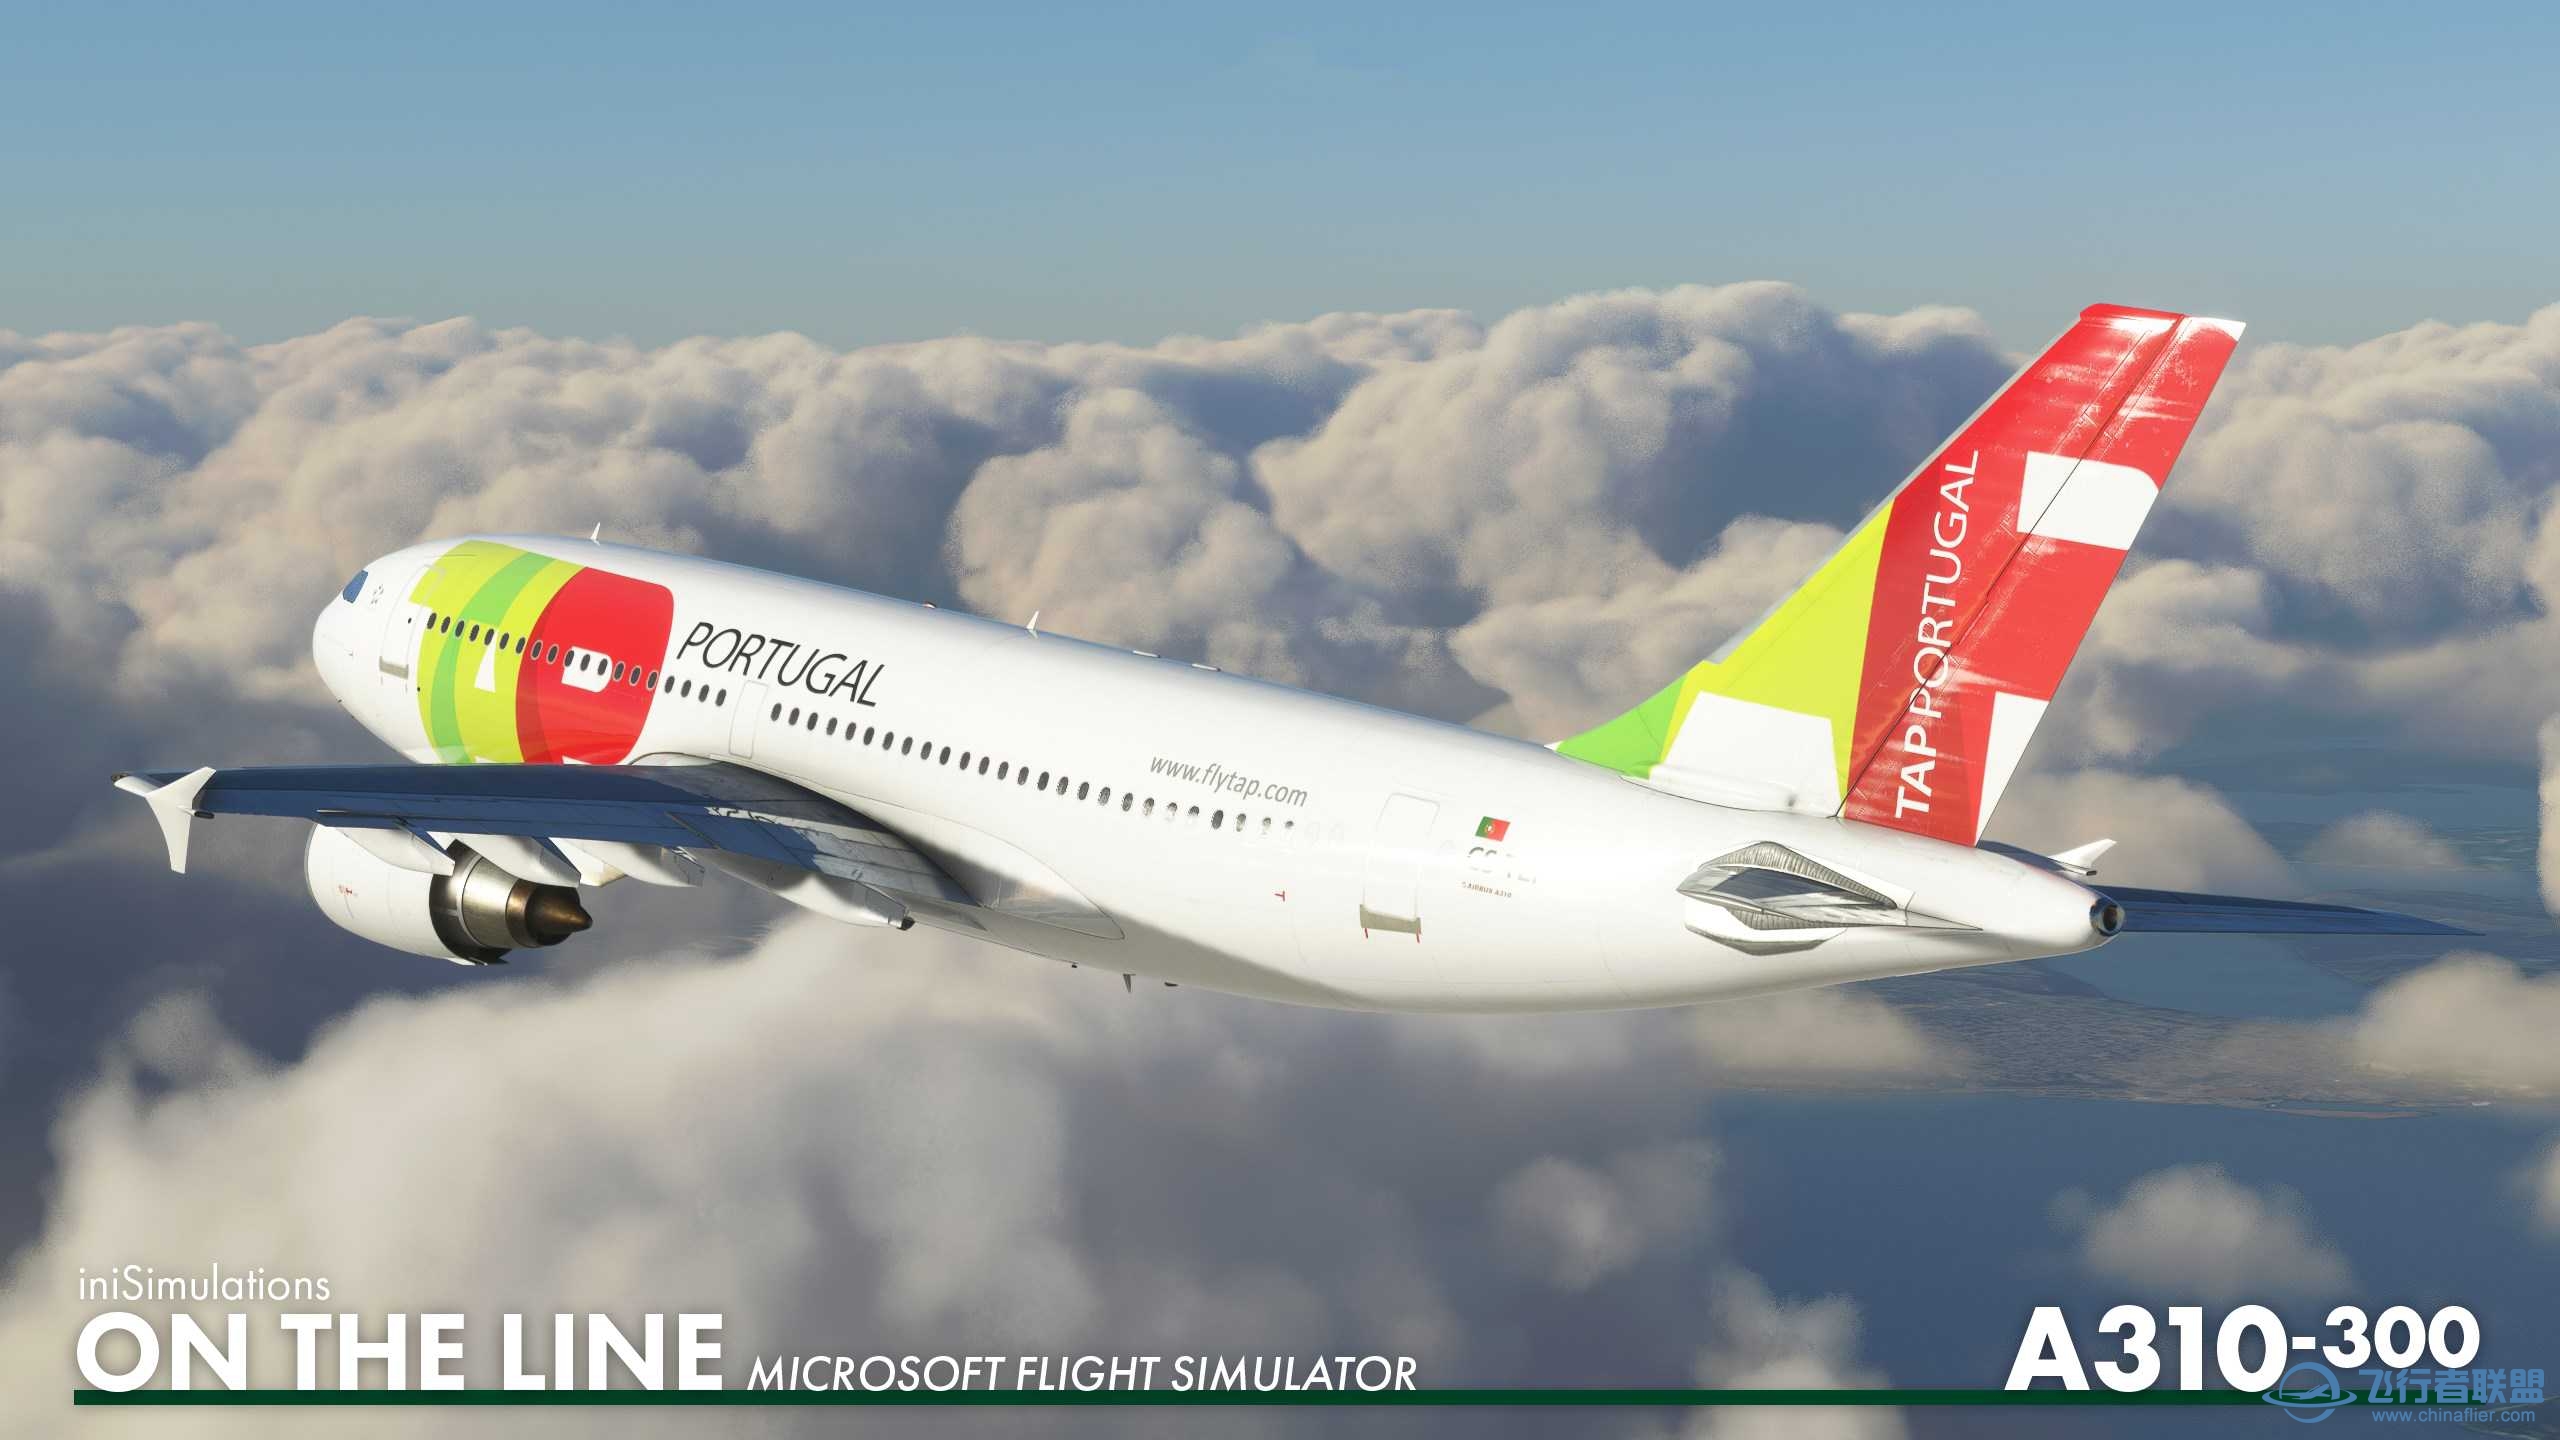 iniSimulations A310-300 will be coming to Microsoft Flight Simulator.-1445 